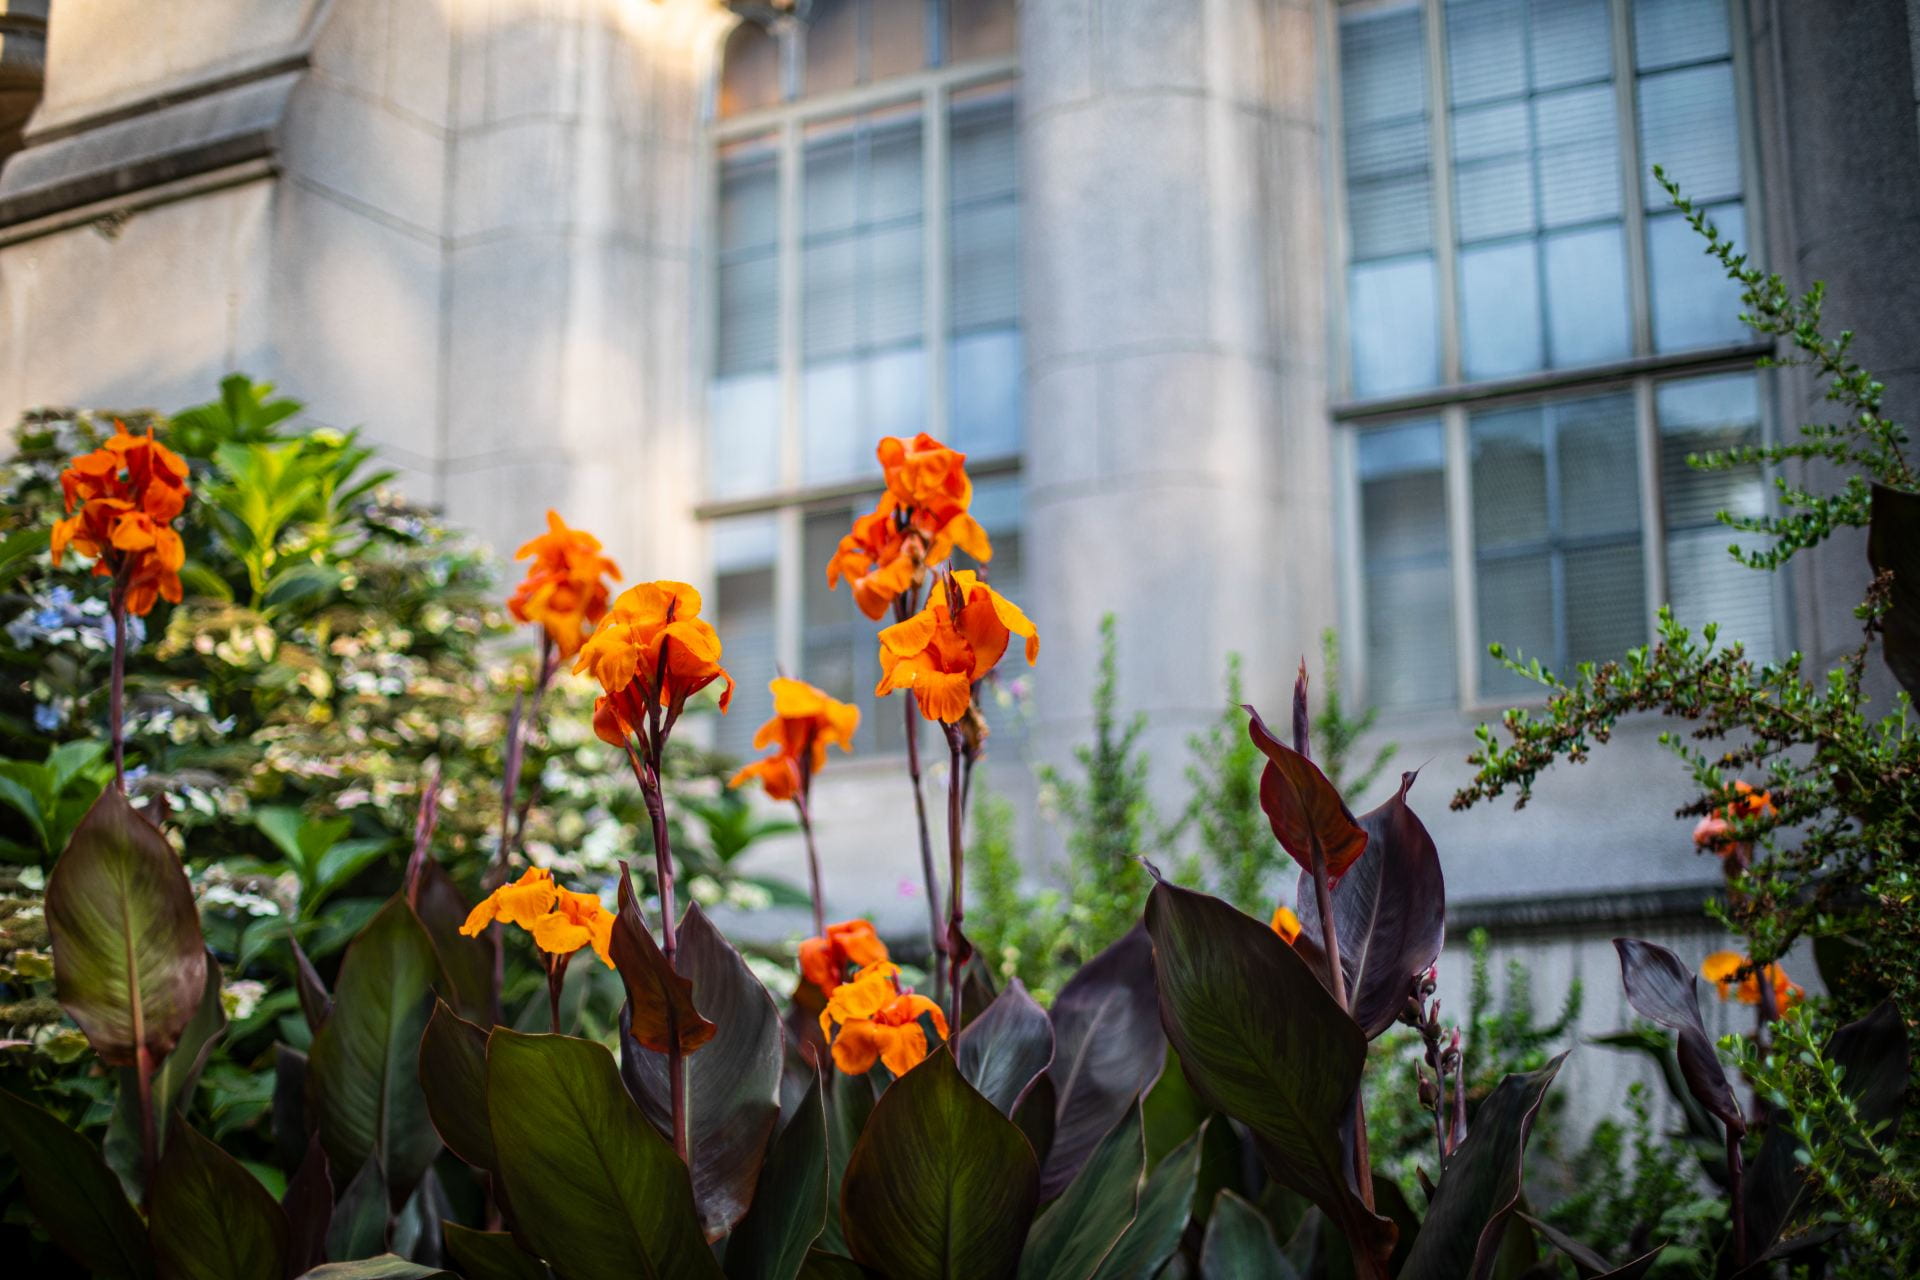 Some irises outside an academic building.